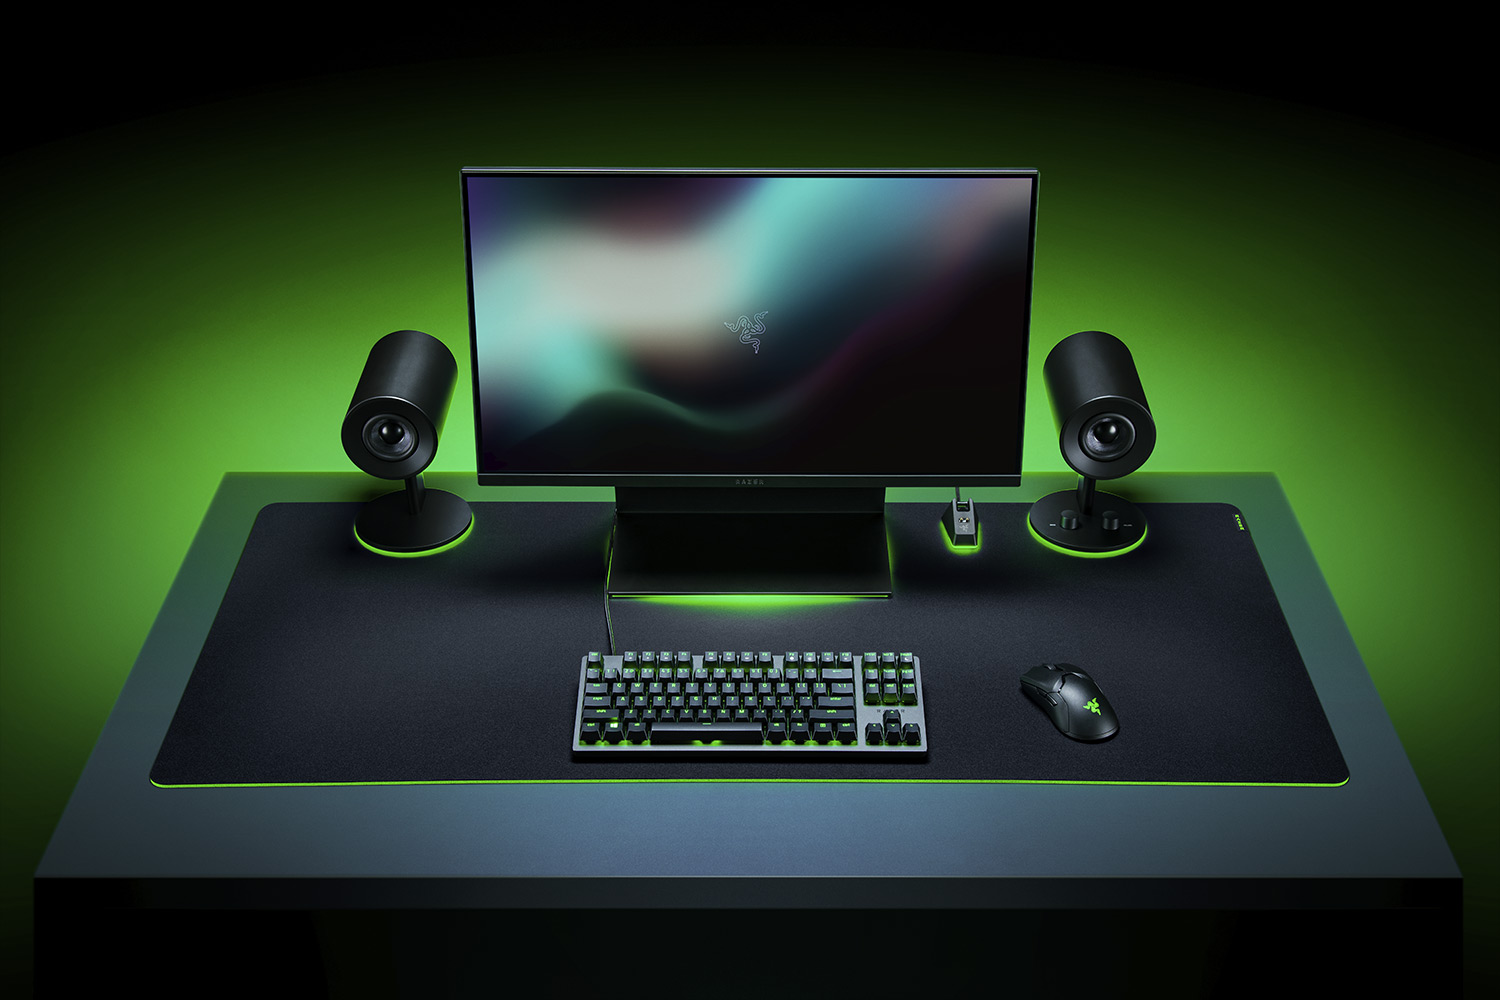 Razer's latest mouse pad can cover most desks